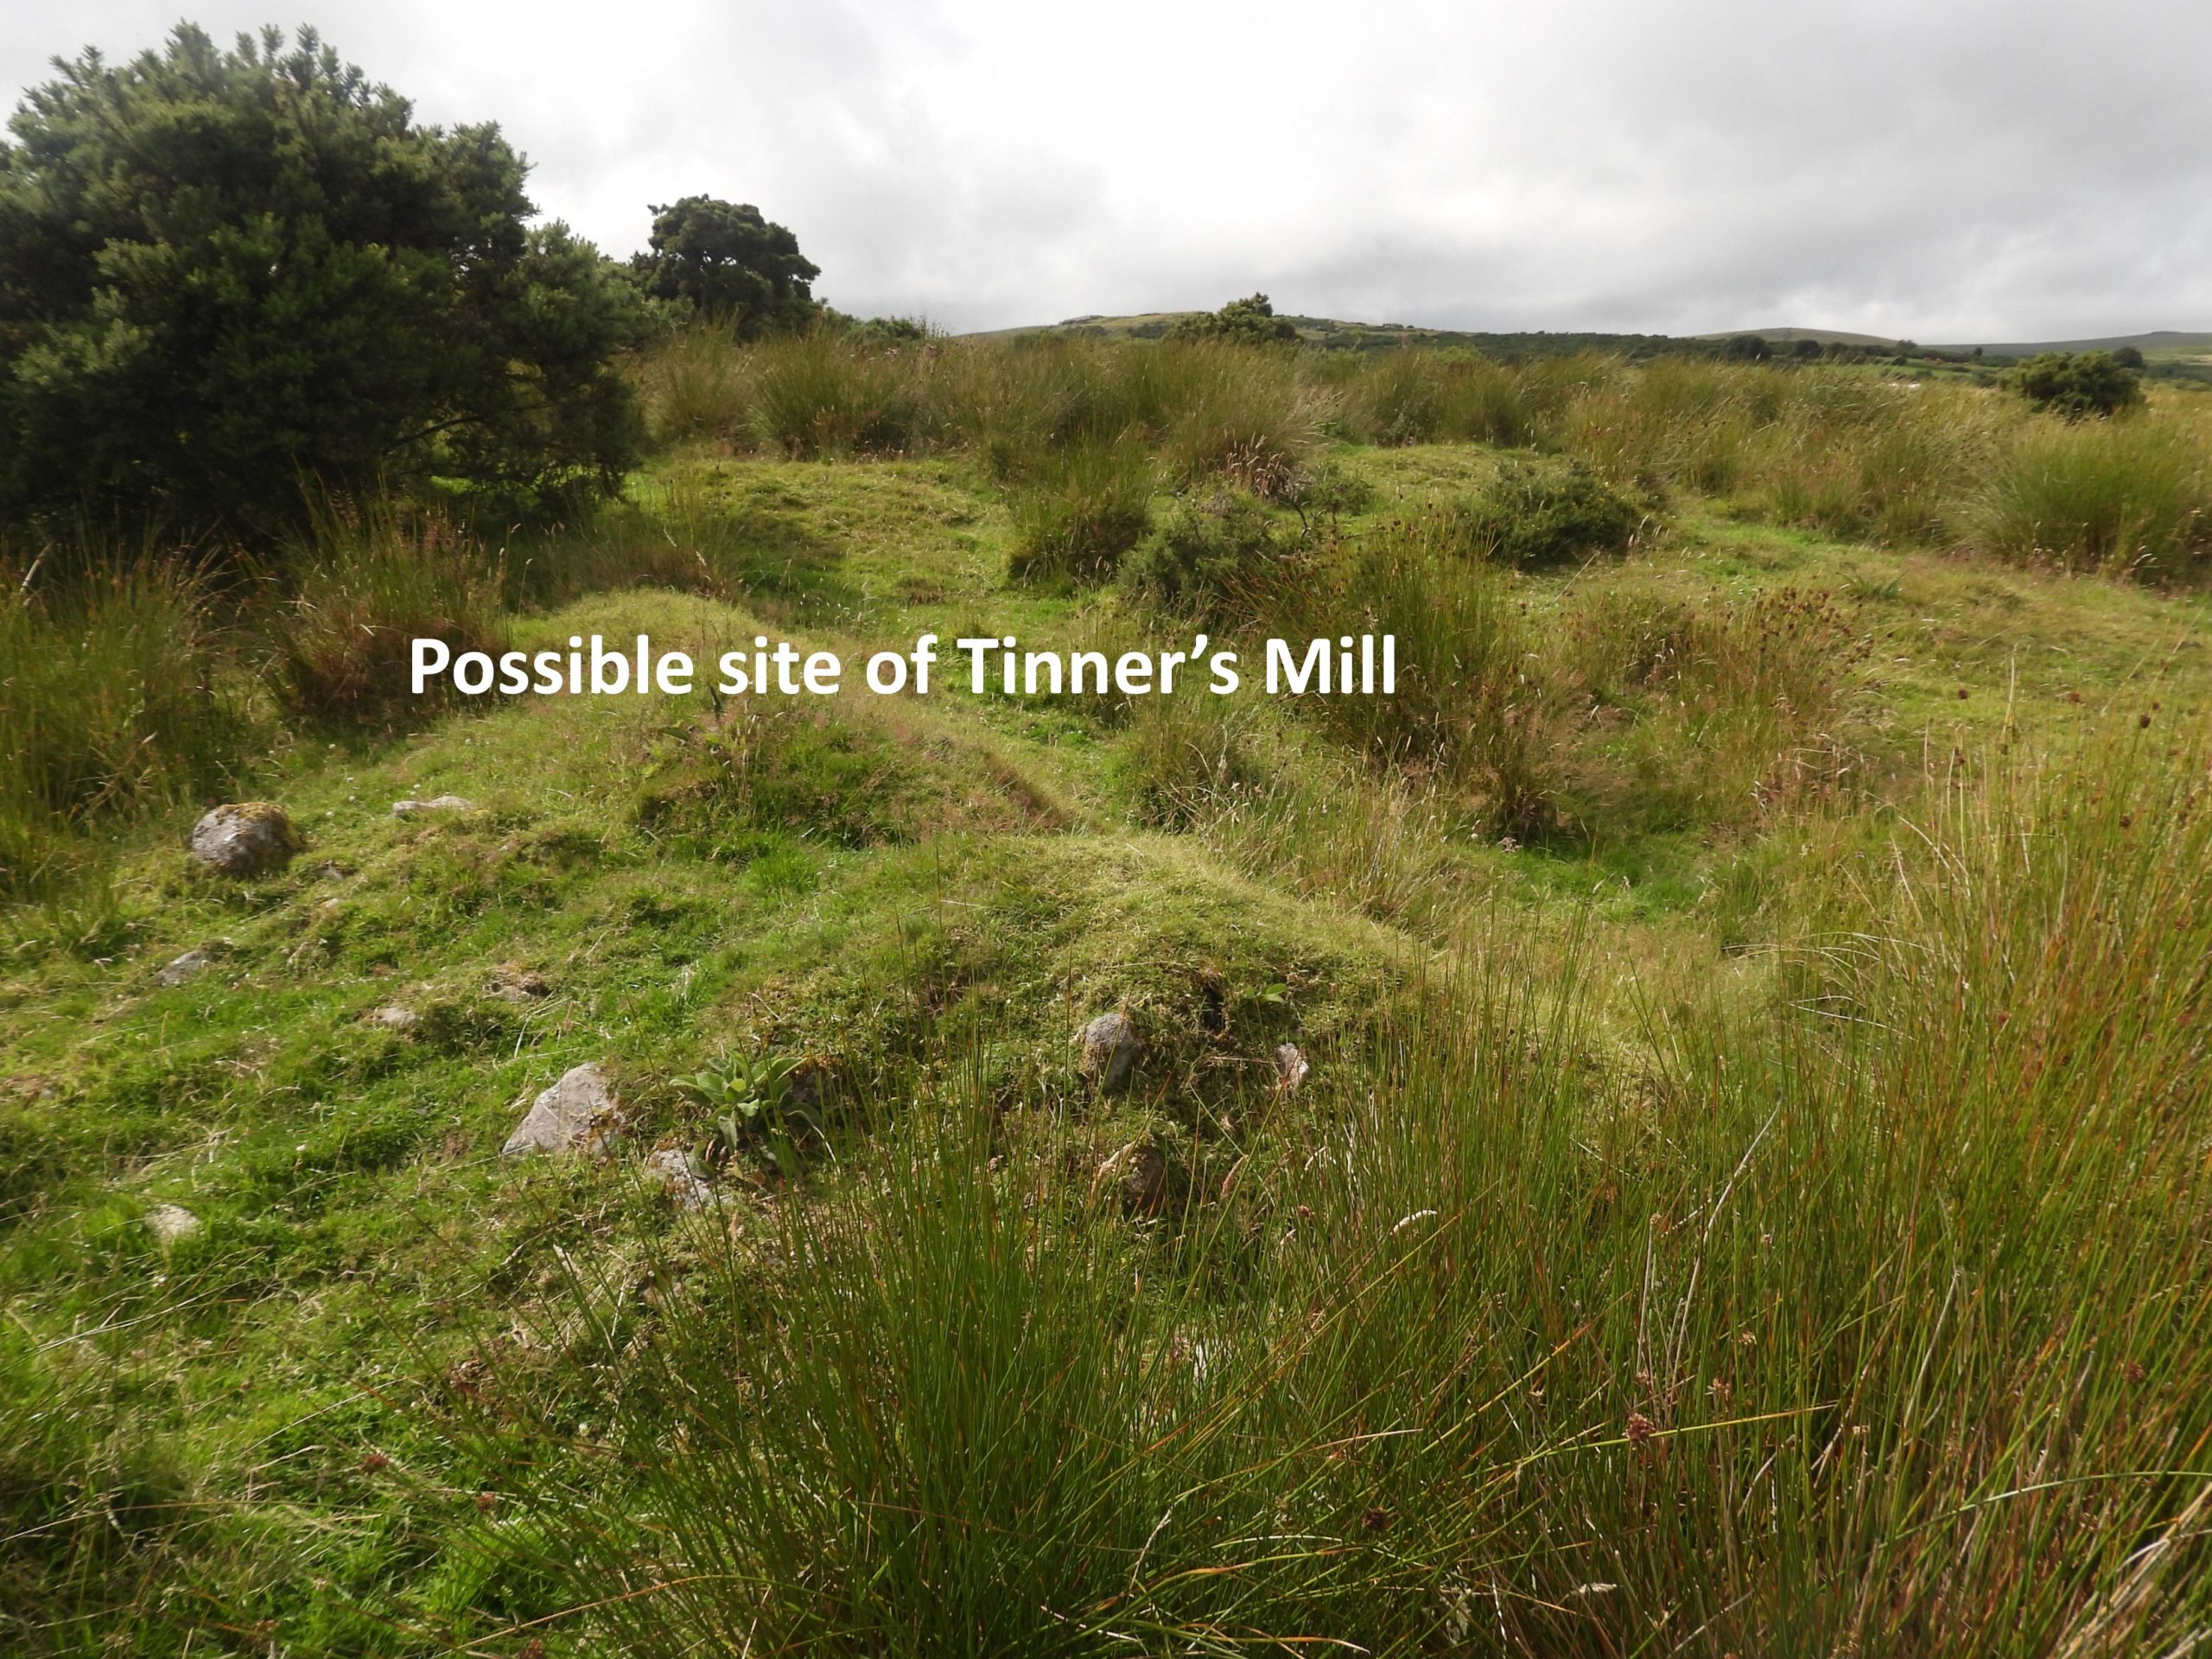 4. Tinners Mill a